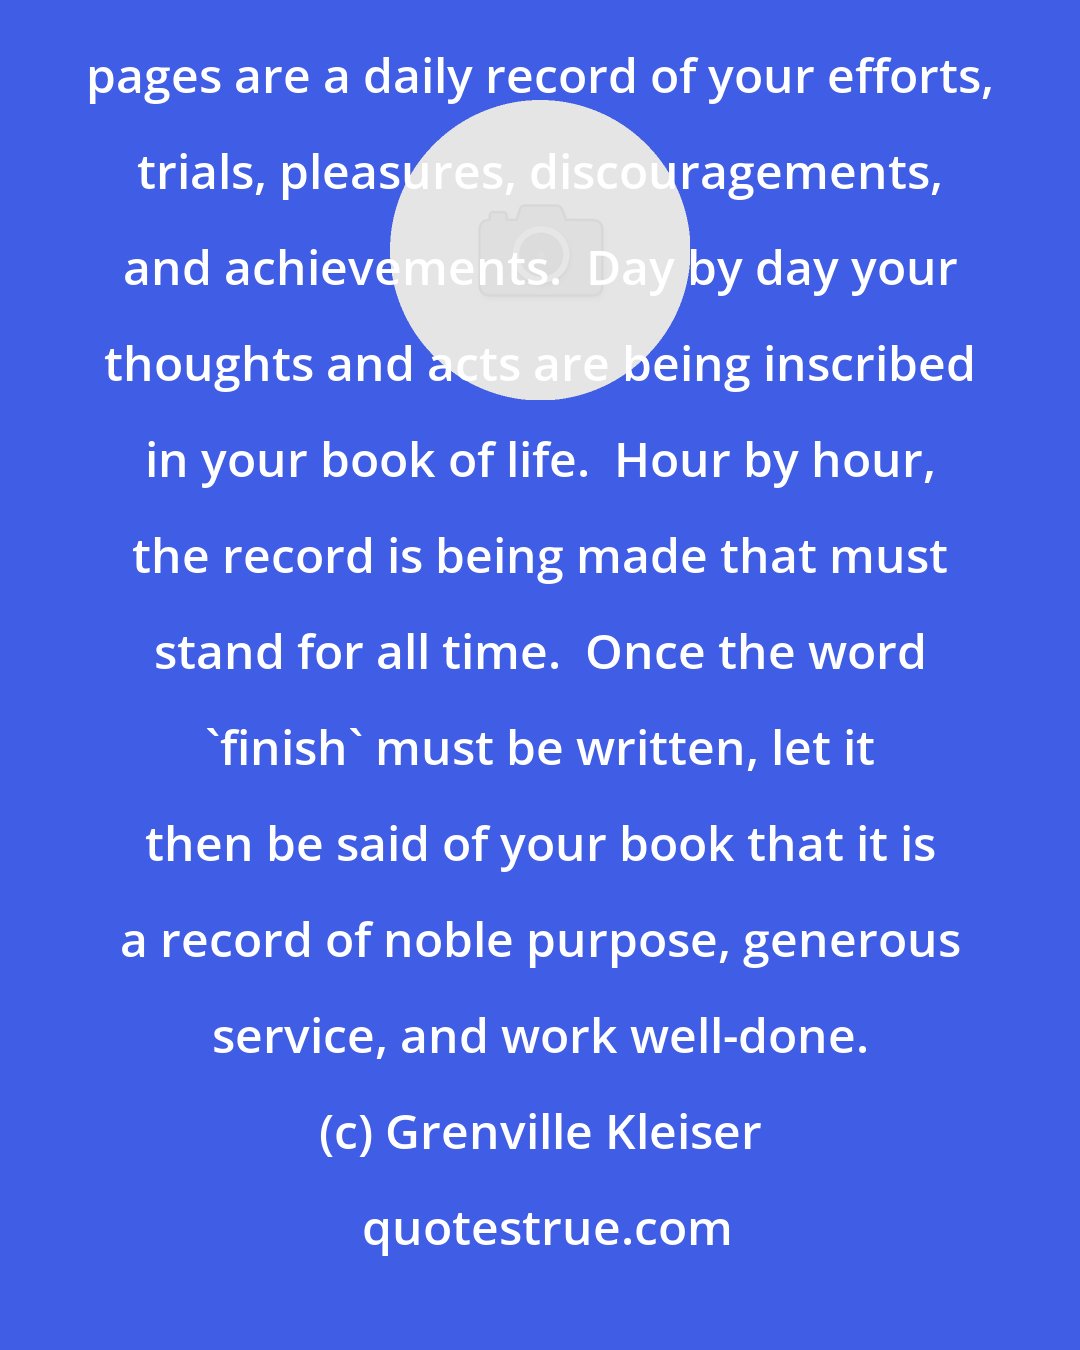 Grenville Kleiser: Your life is like a book.  The title page is your name, the preface your introductions to the world.  The pages are a daily record of your efforts, trials, pleasures, discouragements, and achievements.  Day by day your thoughts and acts are being inscribed in your book of life.  Hour by hour, the record is being made that must stand for all time.  Once the word 'finish' must be written, let it then be said of your book that it is a record of noble purpose, generous service, and work well-done.